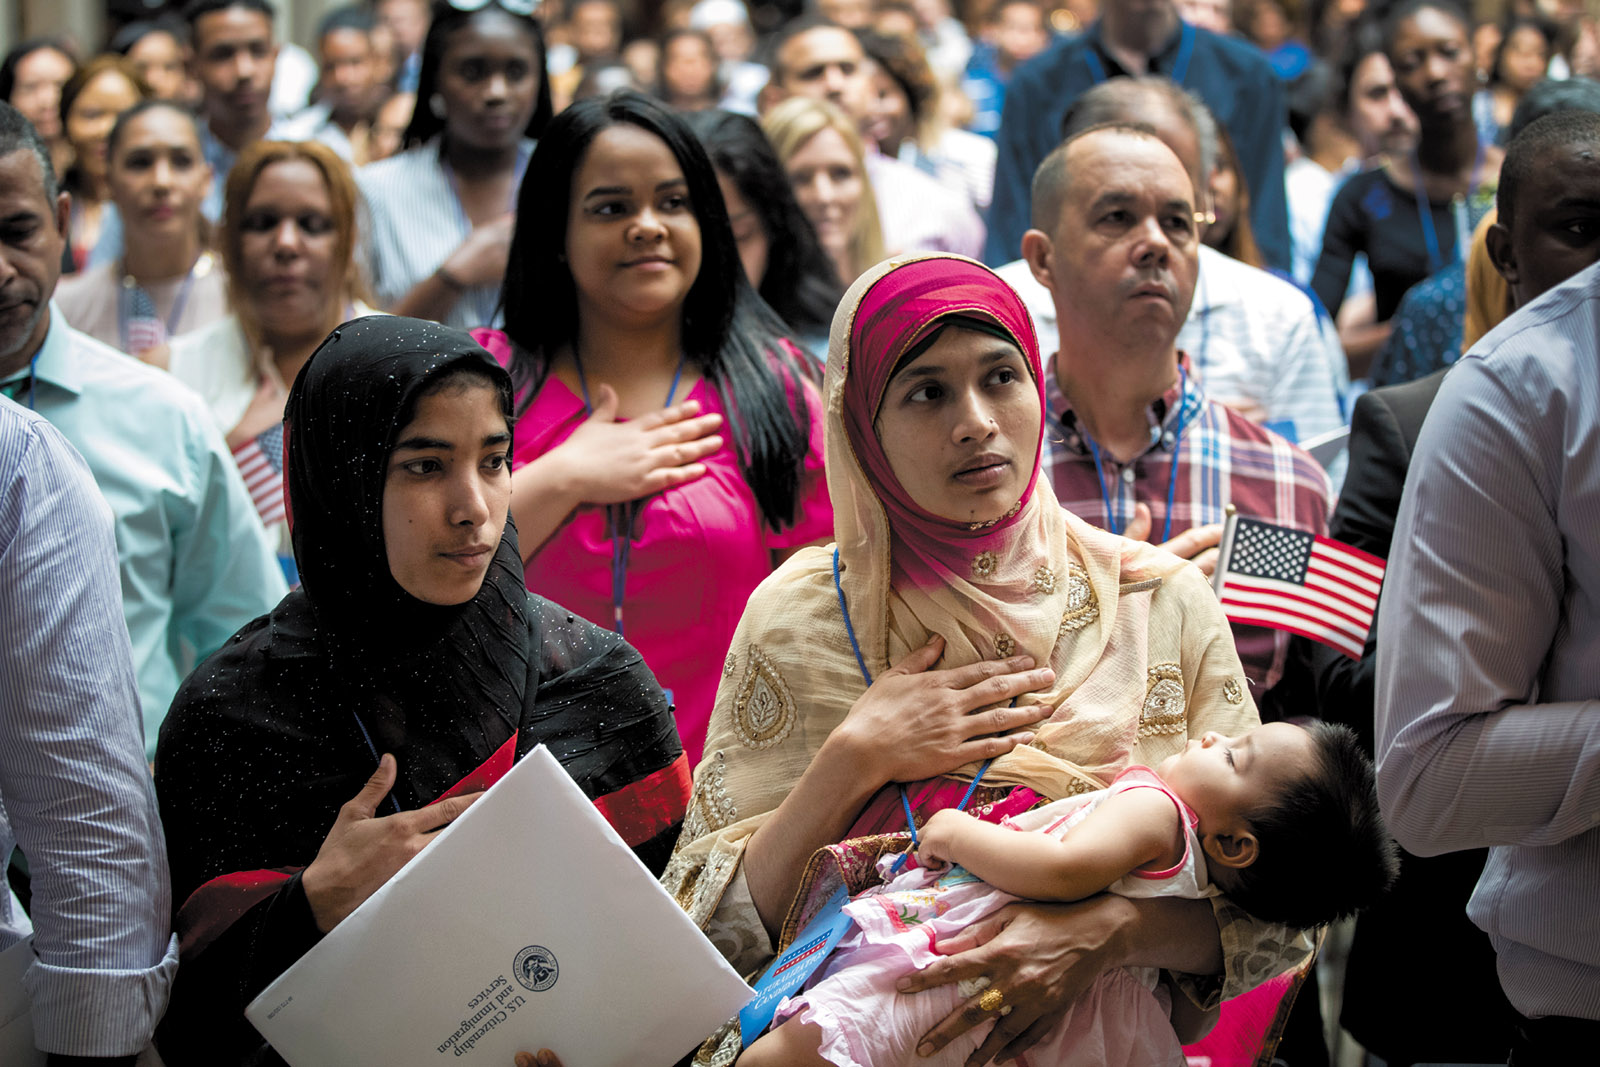 Mosammat Rasheda Akter reciting the Pledge of Allegiance while holding her daughter after becoming a US citizen during a naturalization ceremony, 2018